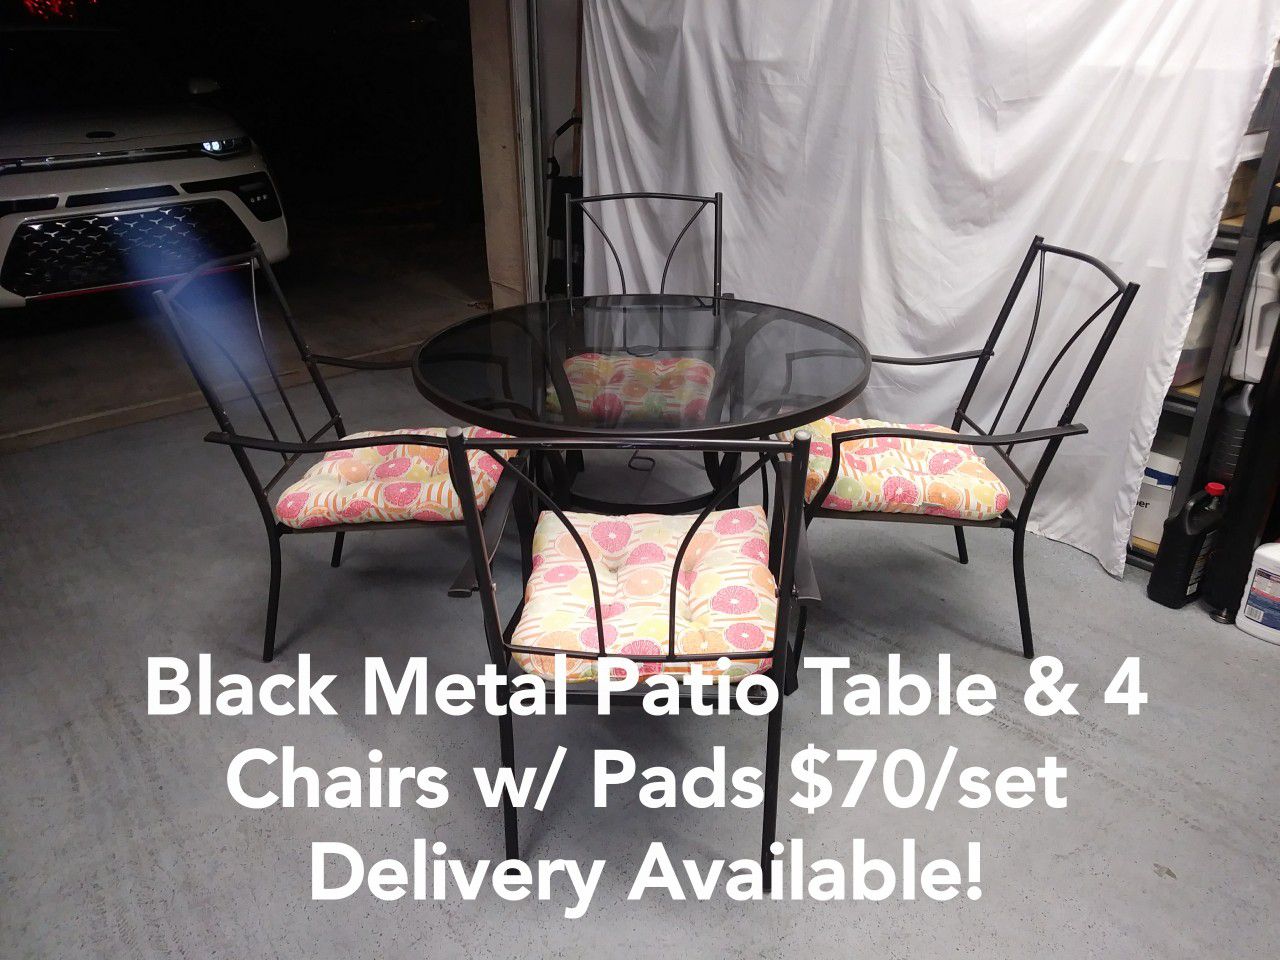 Black Metal Patio Outdoor Table & 4 Chairs w/ Pads